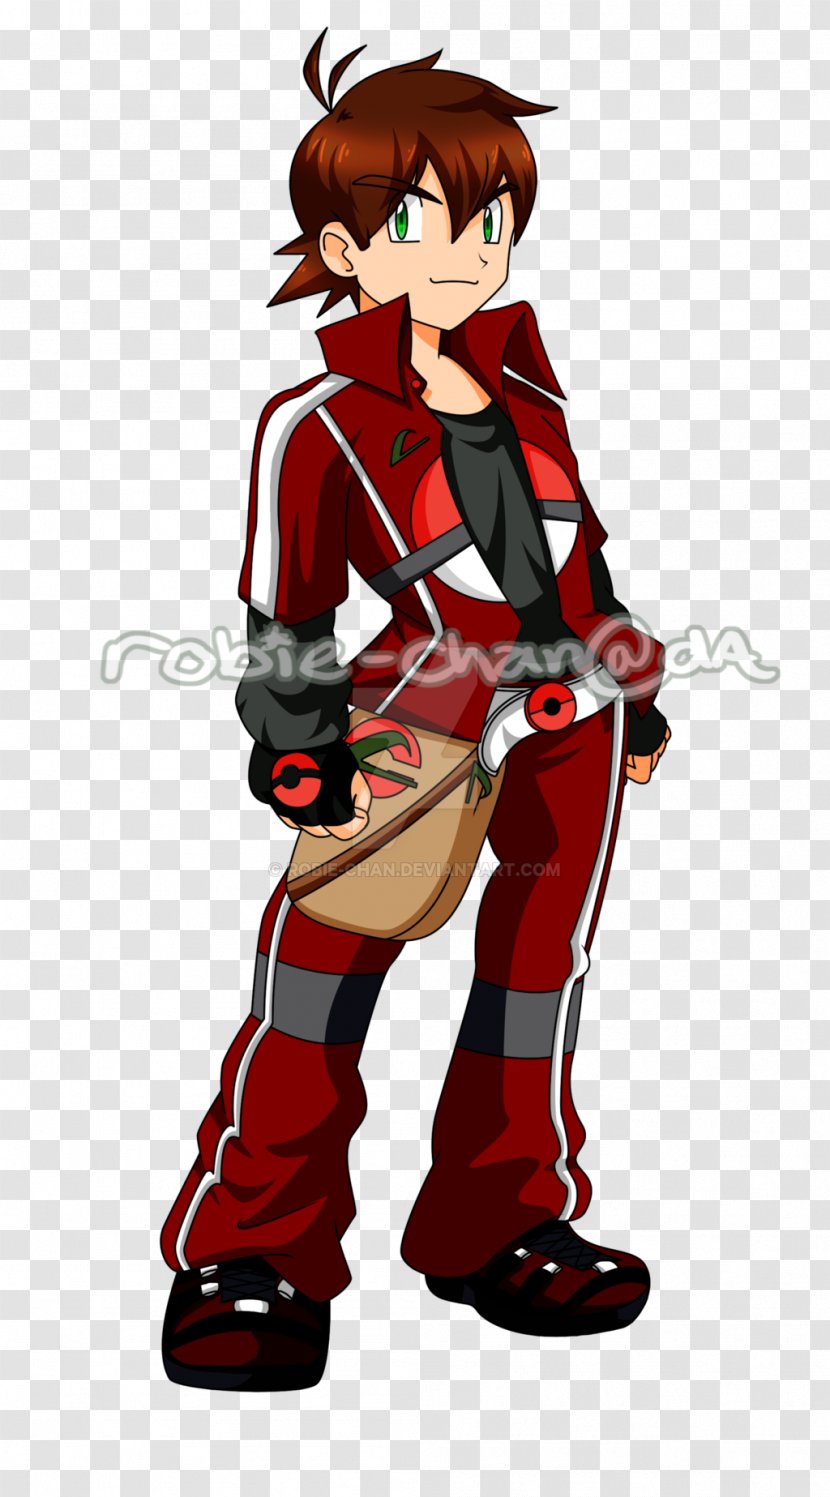 Pokémon Red And Blue Ranger Ash Ketchum Trainer - Tree - Trainers Transparent PNG